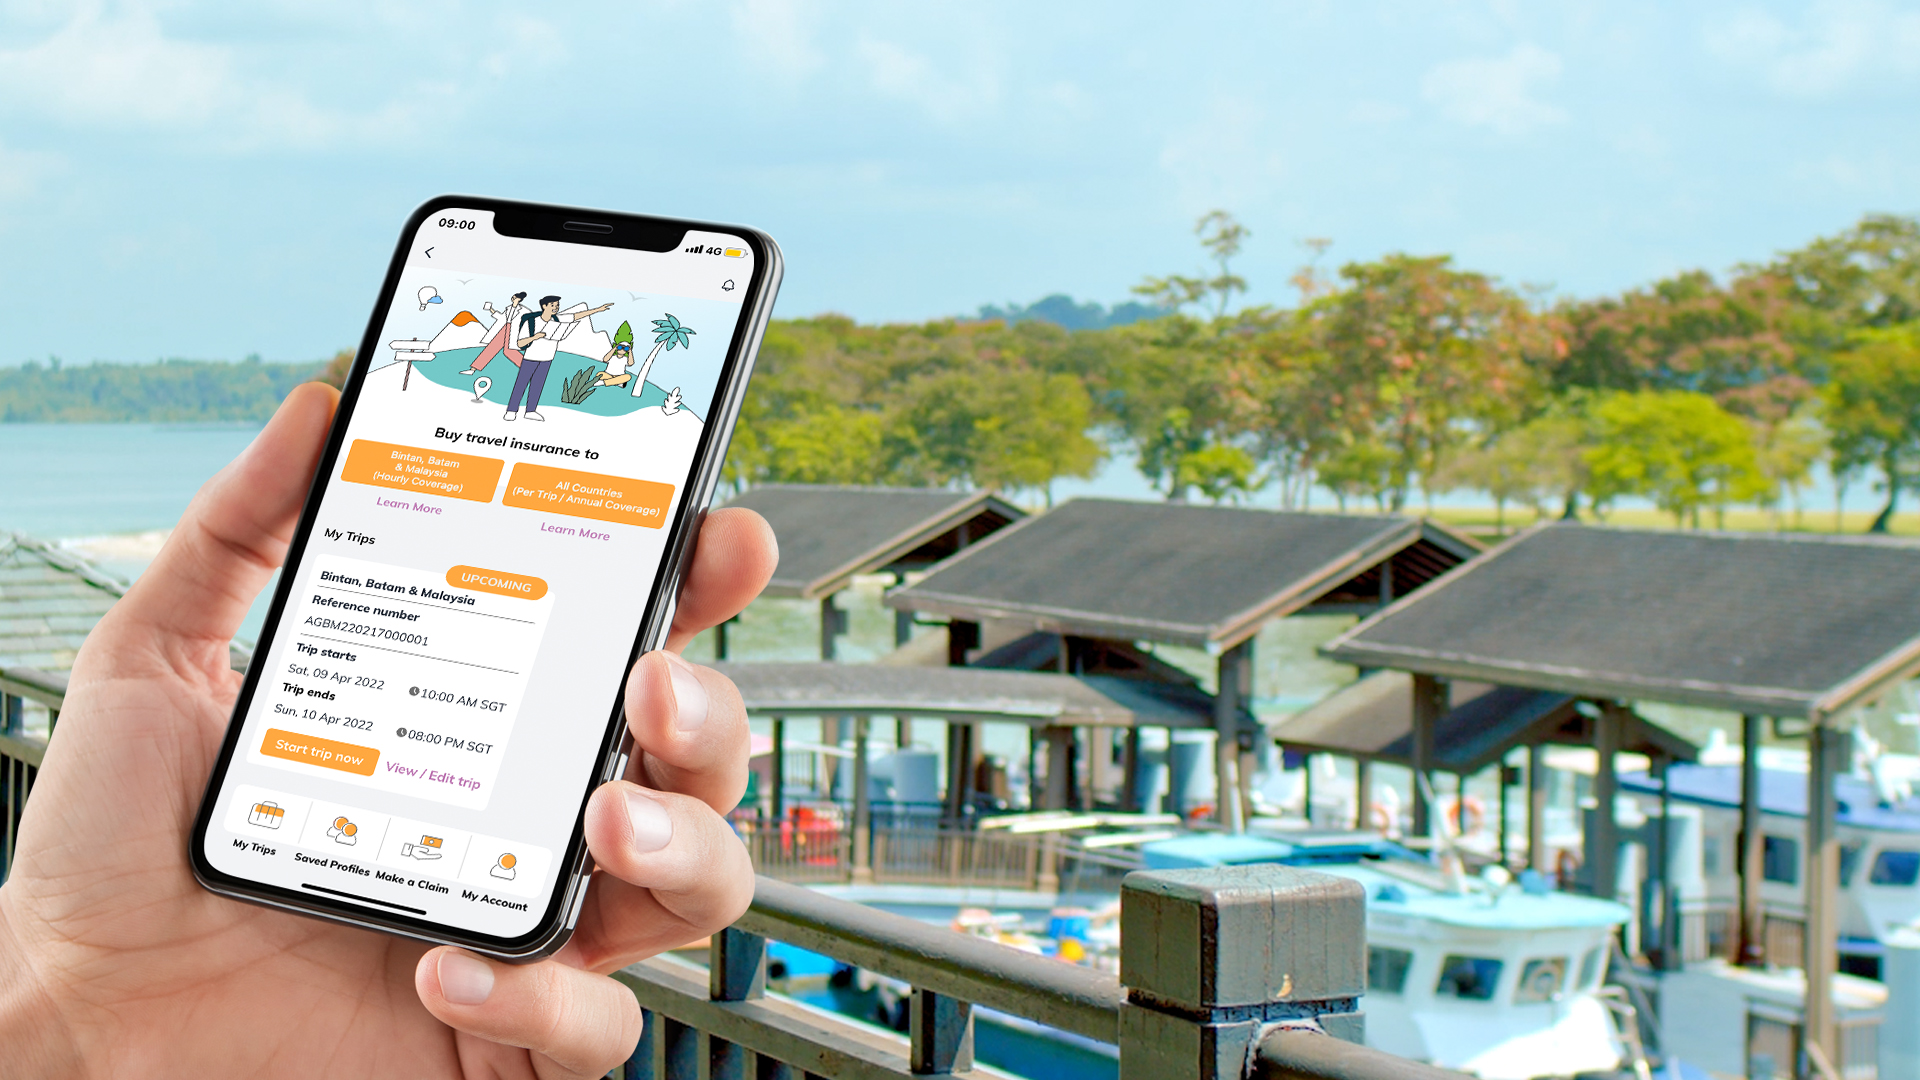 Now Available: Hourly Travel Insurance From $1.80 For 6 Hours For JB Day  Trips Or Bintan Or Batam Weekend Getaways - 8days